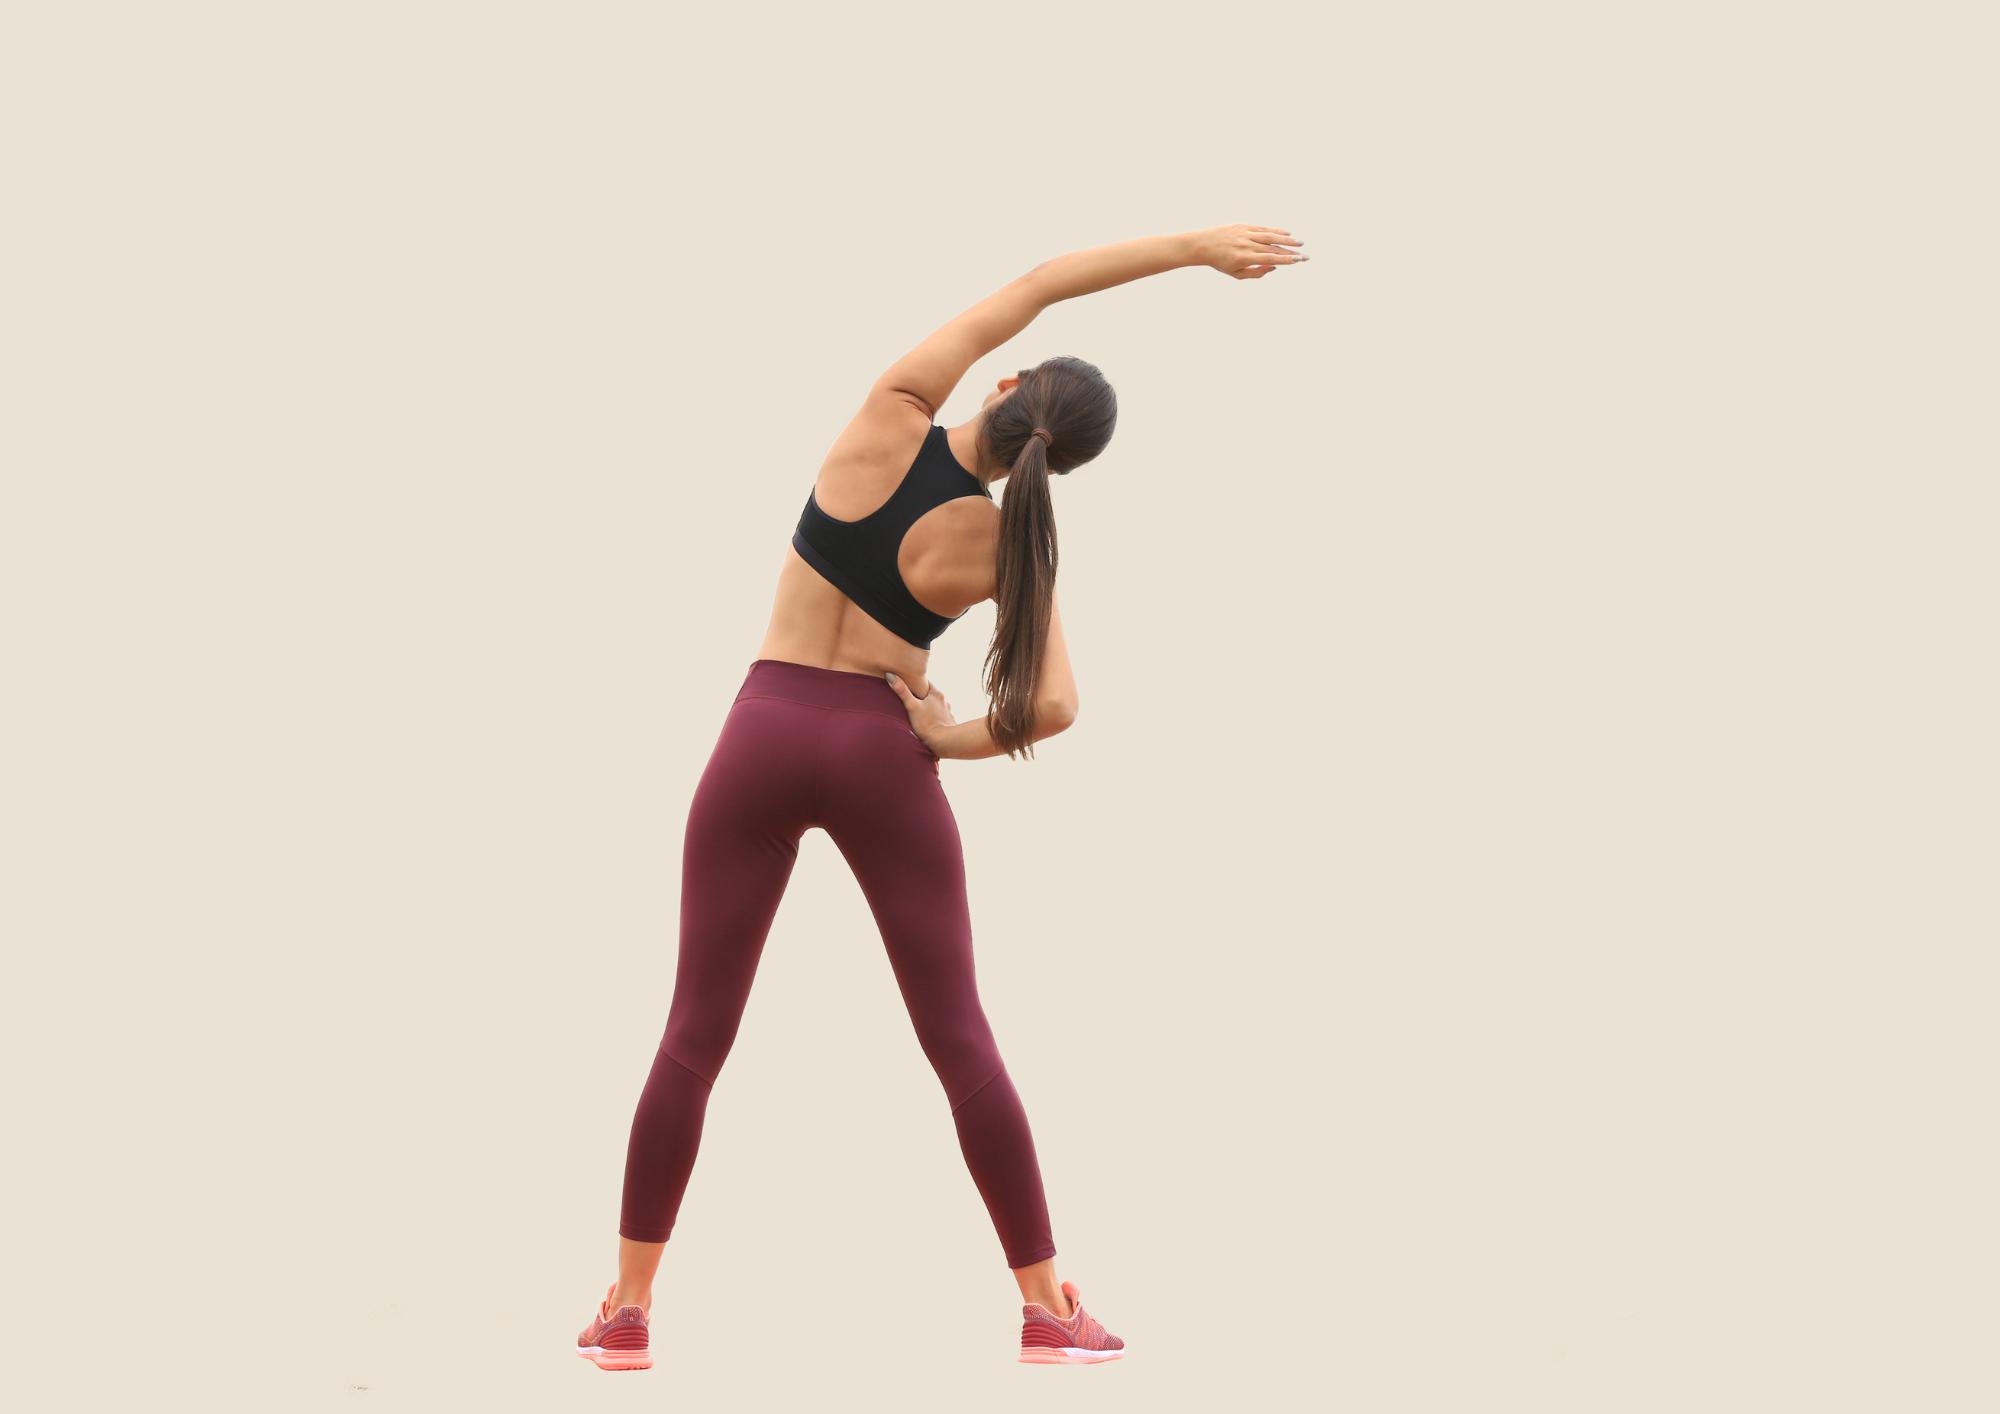 Woman is stretching her back and arms. Beige background.